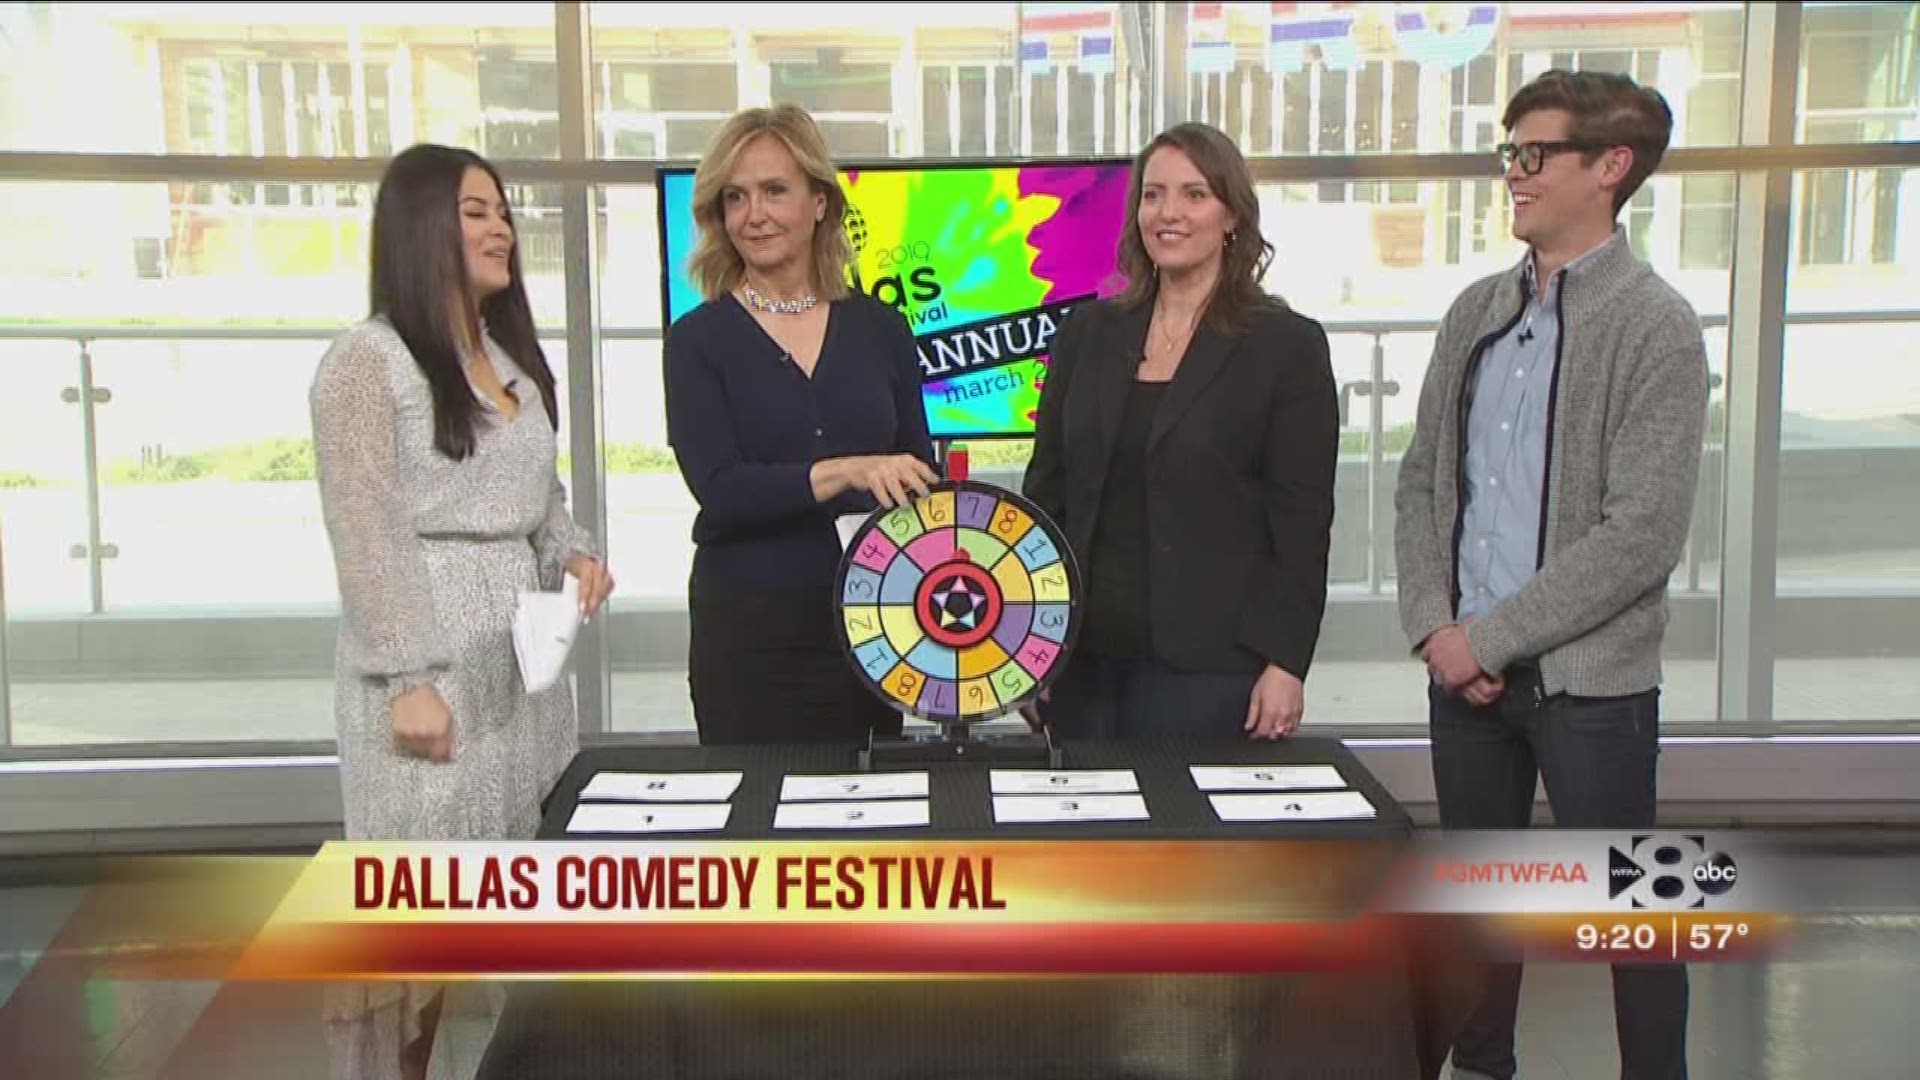 Go to dallascomedyfestival.com for tickets and more information.